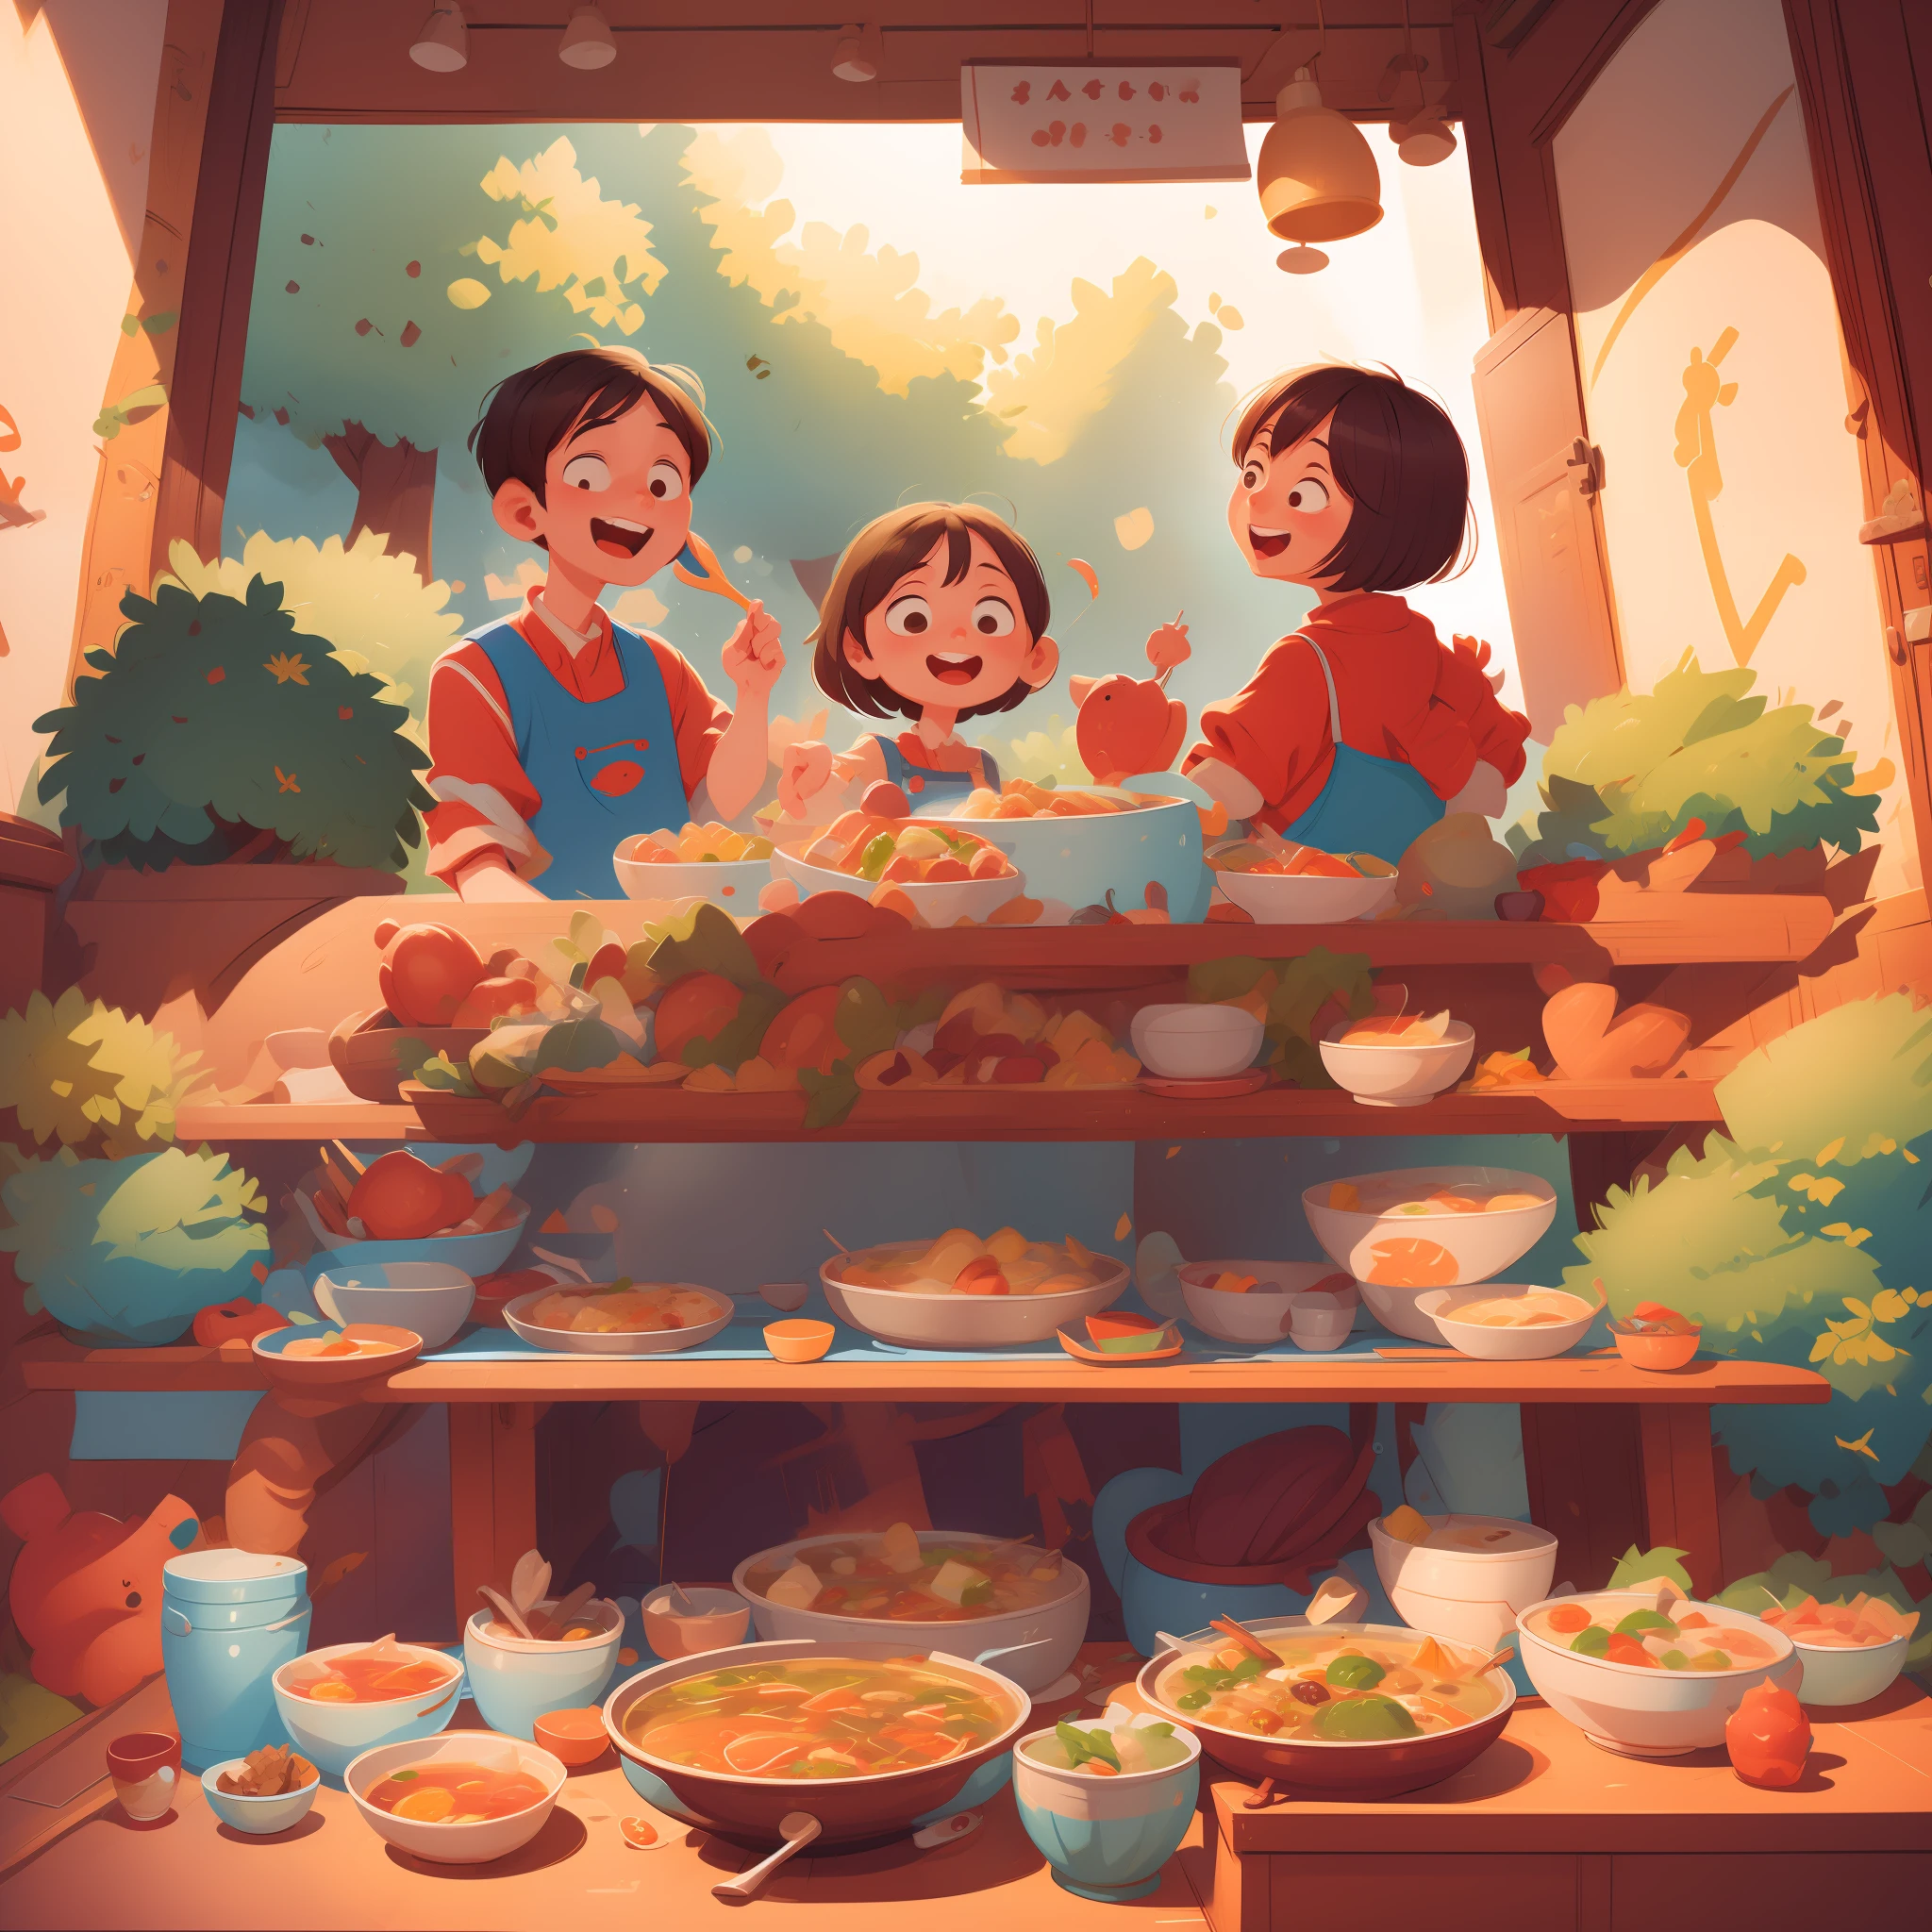 Eating together for two people at table, eating hot pot together, chicken soup hot pot, happy cartoon, hd illustration, exciting illustration, flat illustration, eating chicken, cartoon illustration, kids book illustration, dinner, cooking, detailed 2d illustration, commercial illustration, kids book illustration, full color illustration, 2d illustration